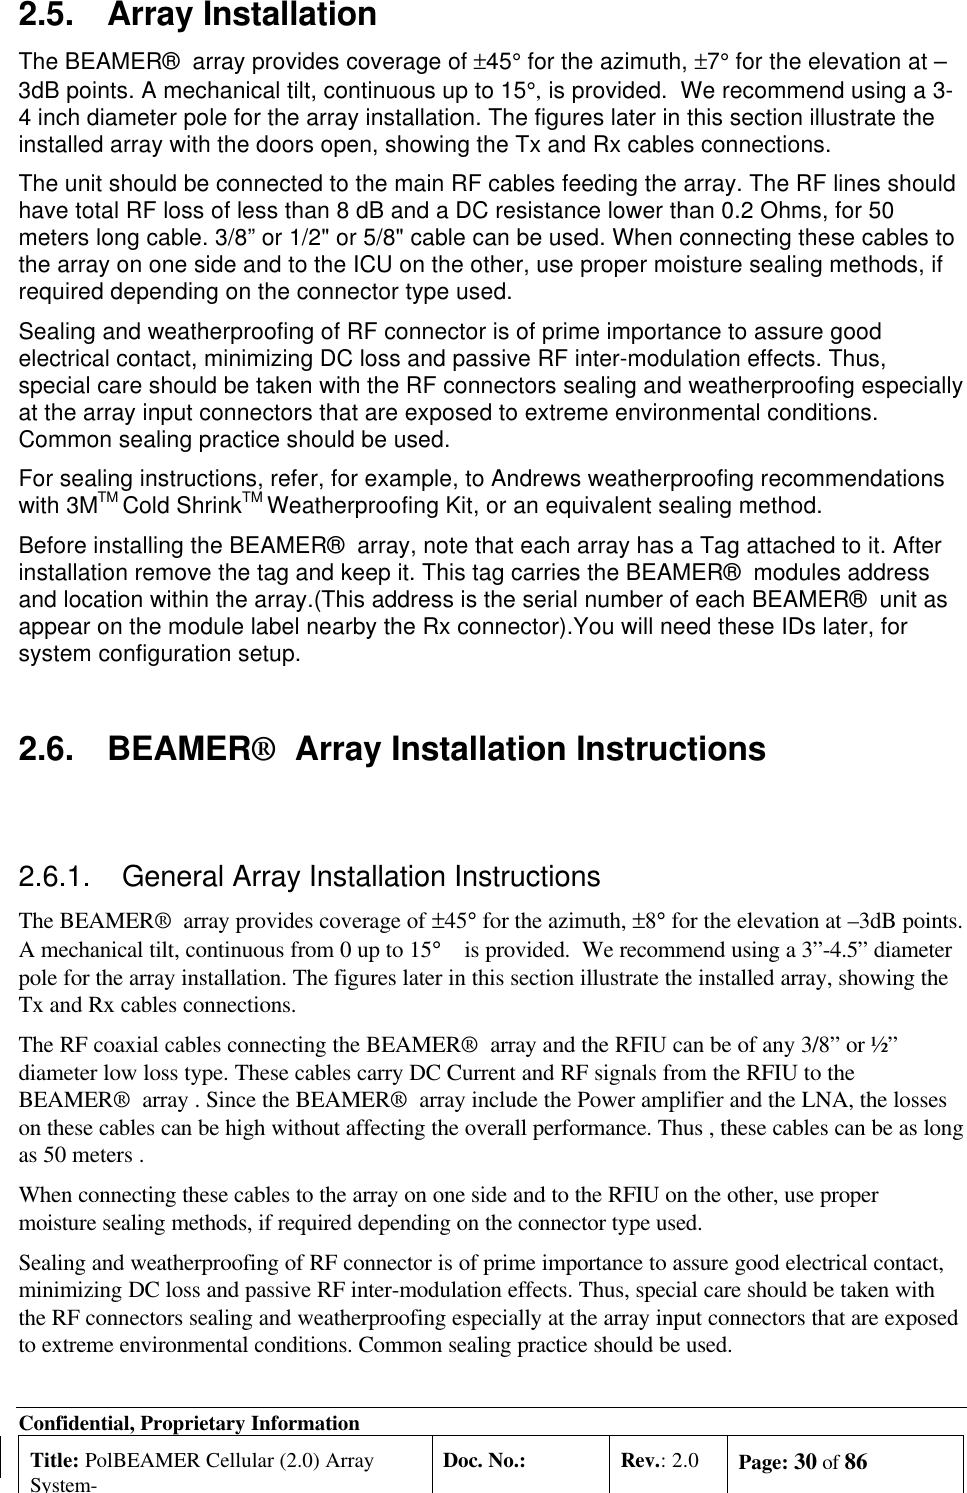 Confidential, Proprietary InformationTitle: PolBEAMER Cellular (2.0) ArraySystem-Doc. No.: Rev.: 2.0 Page: 30 of 862.5. Array InstallationThe BEAMER®  array provides coverage of ±45° for the azimuth, ±7° for the elevation at –3dB points. A mechanical tilt, continuous up to 15°, is provided.  We recommend using a 3-4 inch diameter pole for the array installation. The figures later in this section illustrate theinstalled array with the doors open, showing the Tx and Rx cables connections.The unit should be connected to the main RF cables feeding the array. The RF lines shouldhave total RF loss of less than 8 dB and a DC resistance lower than 0.2 Ohms, for 50meters long cable. 3/8” or 1/2&quot; or 5/8&quot; cable can be used. When connecting these cables tothe array on one side and to the ICU on the other, use proper moisture sealing methods, ifrequired depending on the connector type used.Sealing and weatherproofing of RF connector is of prime importance to assure goodelectrical contact, minimizing DC loss and passive RF inter-modulation effects. Thus,special care should be taken with the RF connectors sealing and weatherproofing especiallyat the array input connectors that are exposed to extreme environmental conditions.Common sealing practice should be used.For sealing instructions, refer, for example, to Andrews weatherproofing recommendationswith 3MTM Cold ShrinkTM Weatherproofing Kit, or an equivalent sealing method.Before installing the BEAMER®  array, note that each array has a Tag attached to it. Afterinstallation remove the tag and keep it. This tag carries the BEAMER®  modules addressand location within the array.(This address is the serial number of each BEAMER®  unit asappear on the module label nearby the Rx connector).You will need these IDs later, forsystem configuration setup.2.6. BEAMER®  Array Installation Instructions2.6.1. General Array Installation InstructionsThe BEAMER®  array provides coverage of ±45° for the azimuth, ±8° for the elevation at –3dB points.A mechanical tilt, continuous from 0 up to 15° is provided.  We recommend using a 3”-4.5” diameterpole for the array installation. The figures later in this section illustrate the installed array, showing theTx and Rx cables connections.The RF coaxial cables connecting the BEAMER®  array and the RFIU can be of any 3/8” or ½”diameter low loss type. These cables carry DC Current and RF signals from the RFIU to theBEAMER®  array . Since the BEAMER®  array include the Power amplifier and the LNA, the losseson these cables can be high without affecting the overall performance. Thus , these cables can be as longas 50 meters .When connecting these cables to the array on one side and to the RFIU on the other, use propermoisture sealing methods, if required depending on the connector type used.Sealing and weatherproofing of RF connector is of prime importance to assure good electrical contact,minimizing DC loss and passive RF inter-modulation effects. Thus, special care should be taken withthe RF connectors sealing and weatherproofing especially at the array input connectors that are exposedto extreme environmental conditions. Common sealing practice should be used.